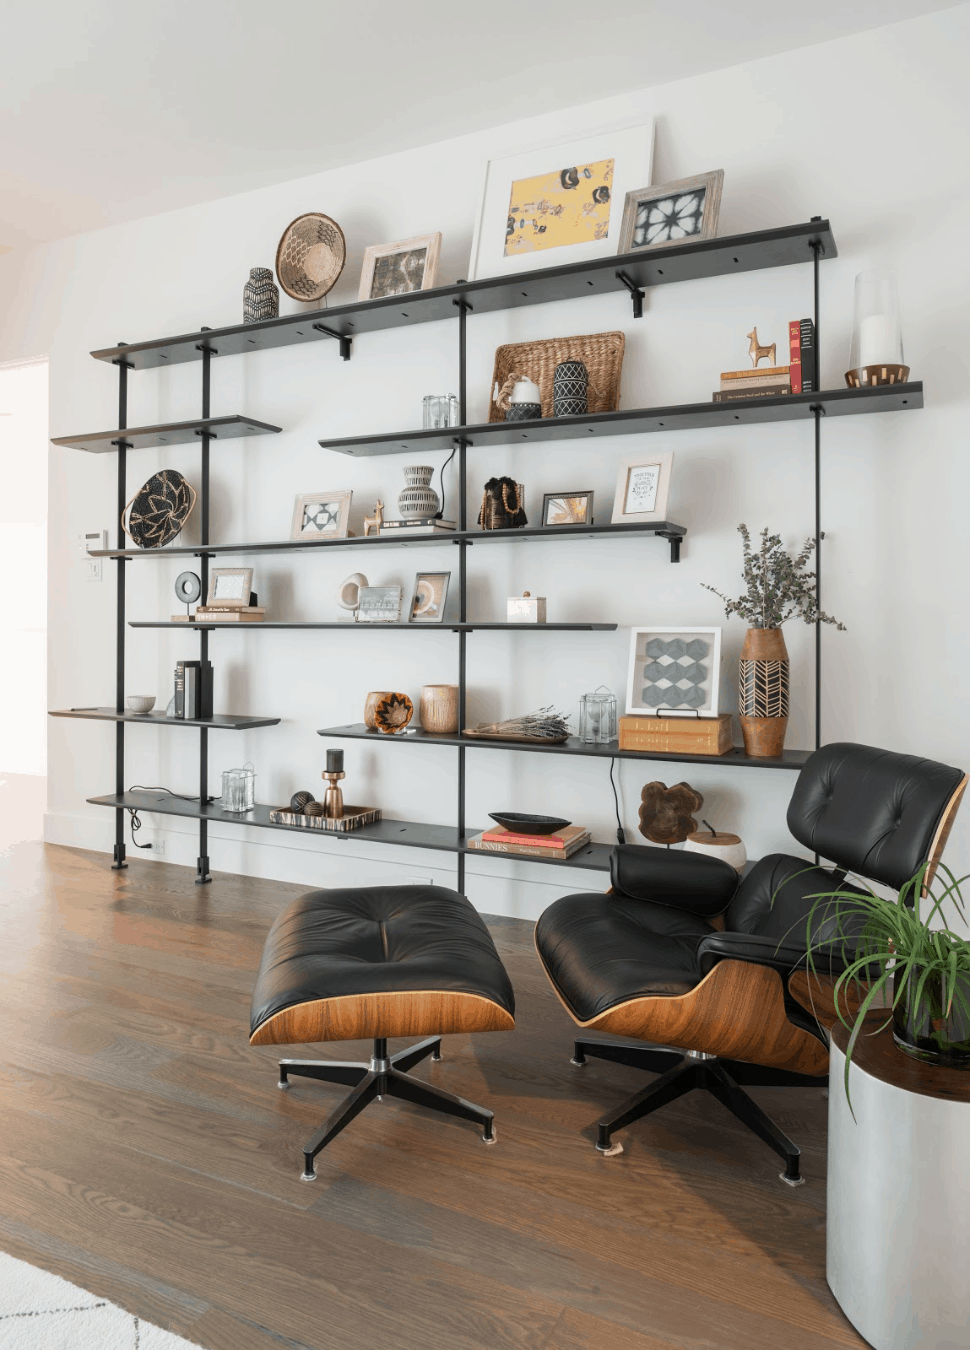 Modern industrial bookshelves with iconic objects worth collecting - Laura U Interior Designer